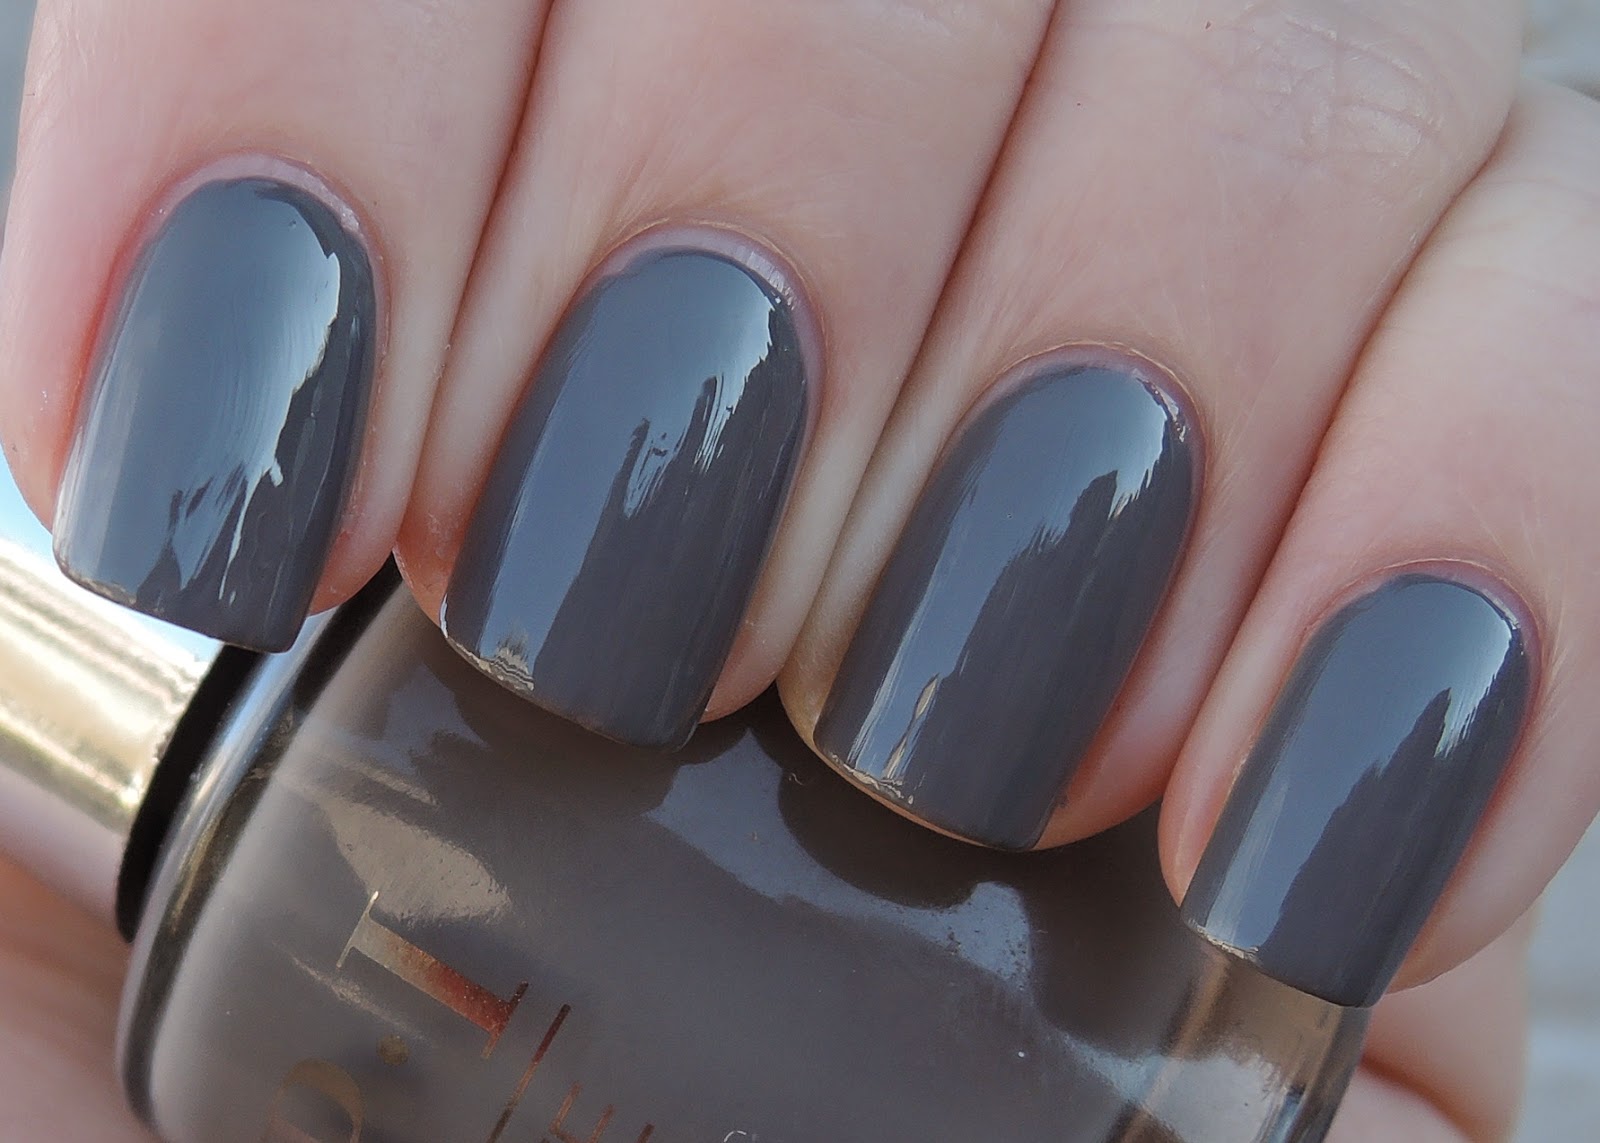 OPI Nail Lacquer in "Steel Waters Run Deep" - wide 2